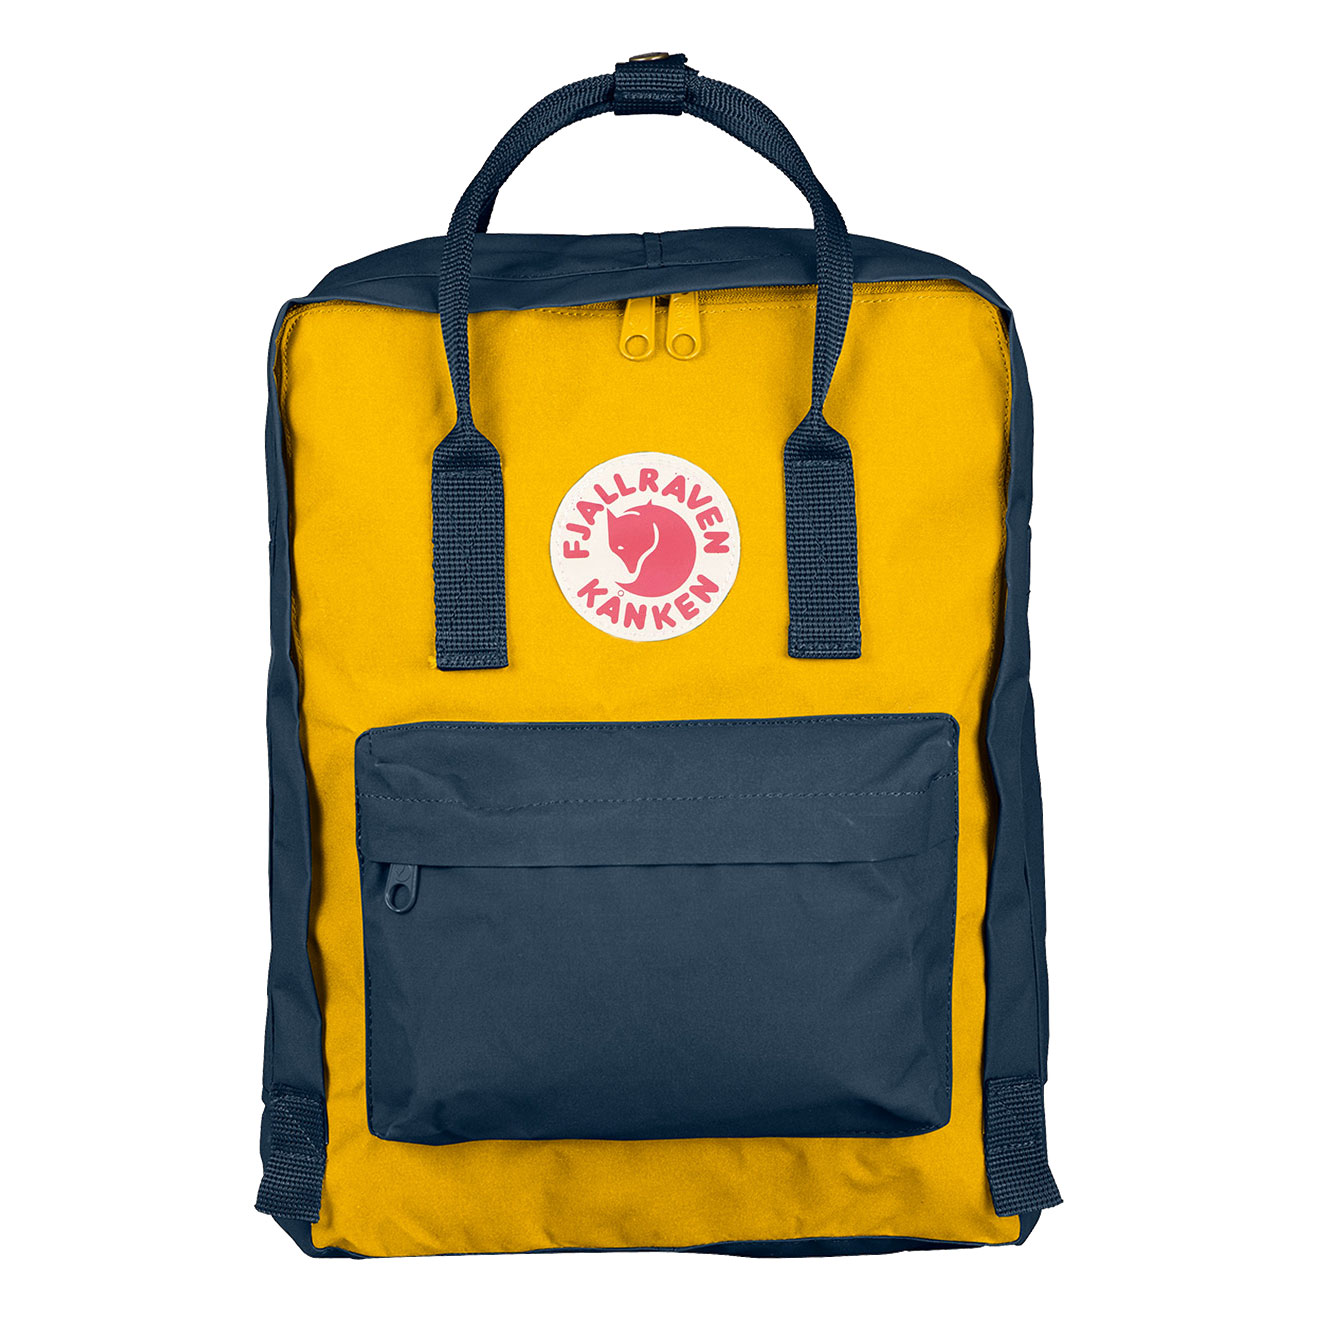 monogrammed backpack and lunchbox